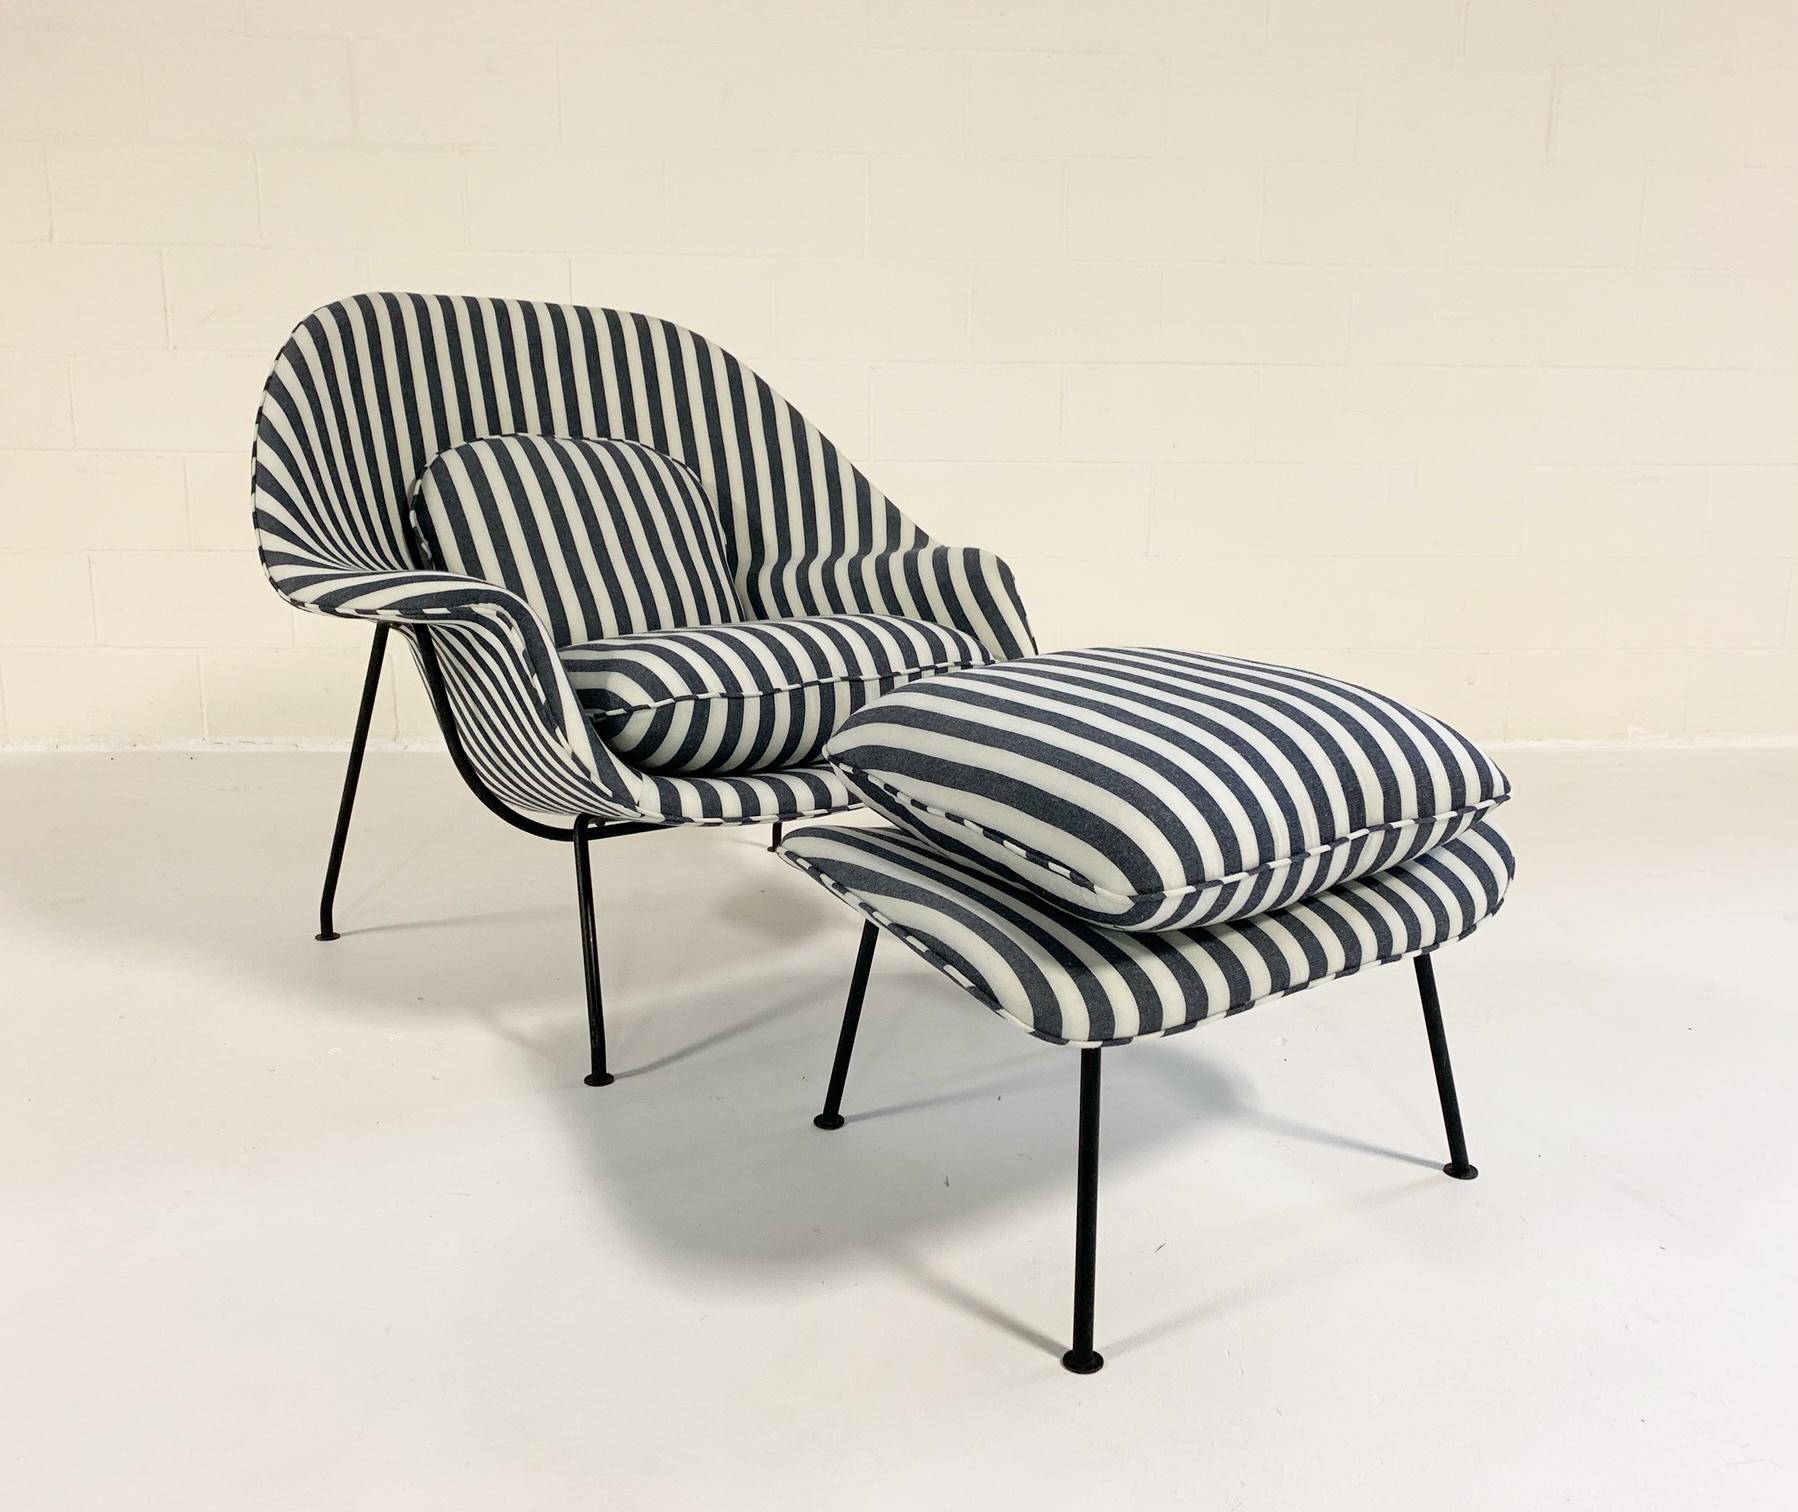 This iconic chair is part of the Kule x Forsyth collab. Introducing a collection of timeless design icons restored by Forsyth with fabric designed by Kule. The collection includes an Eero Saarinen Womb chair, Ludwig Mies van der Rohe Brno chairs,